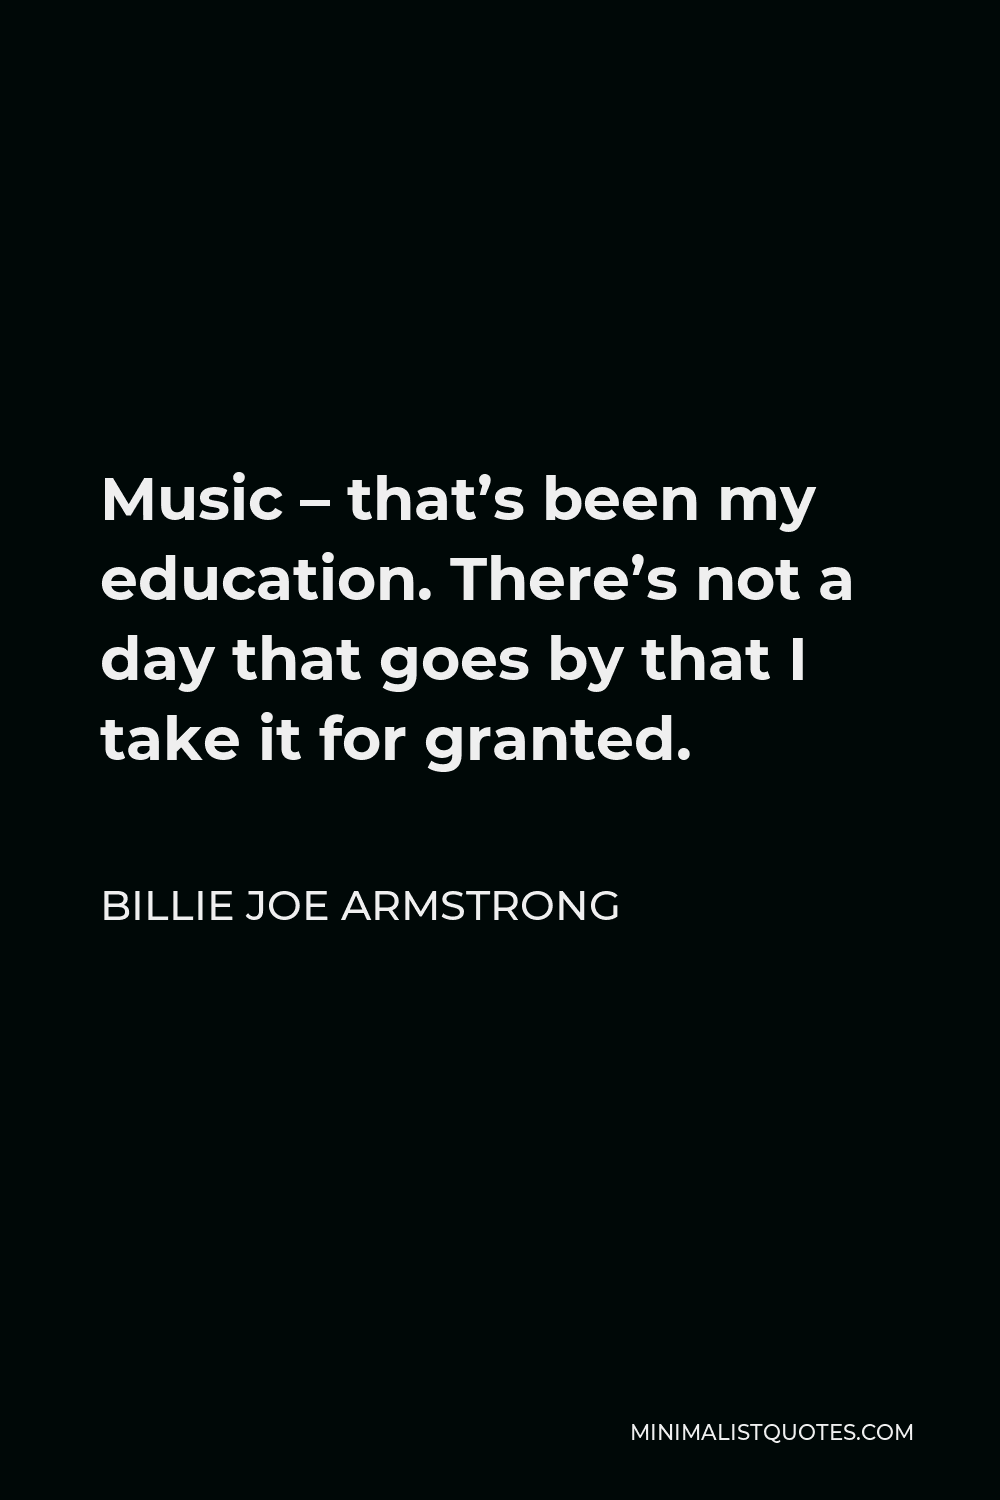 Billie Joe Armstrong Quote - Music – that’s been my education. There’s not a day that goes by that I take it for granted.